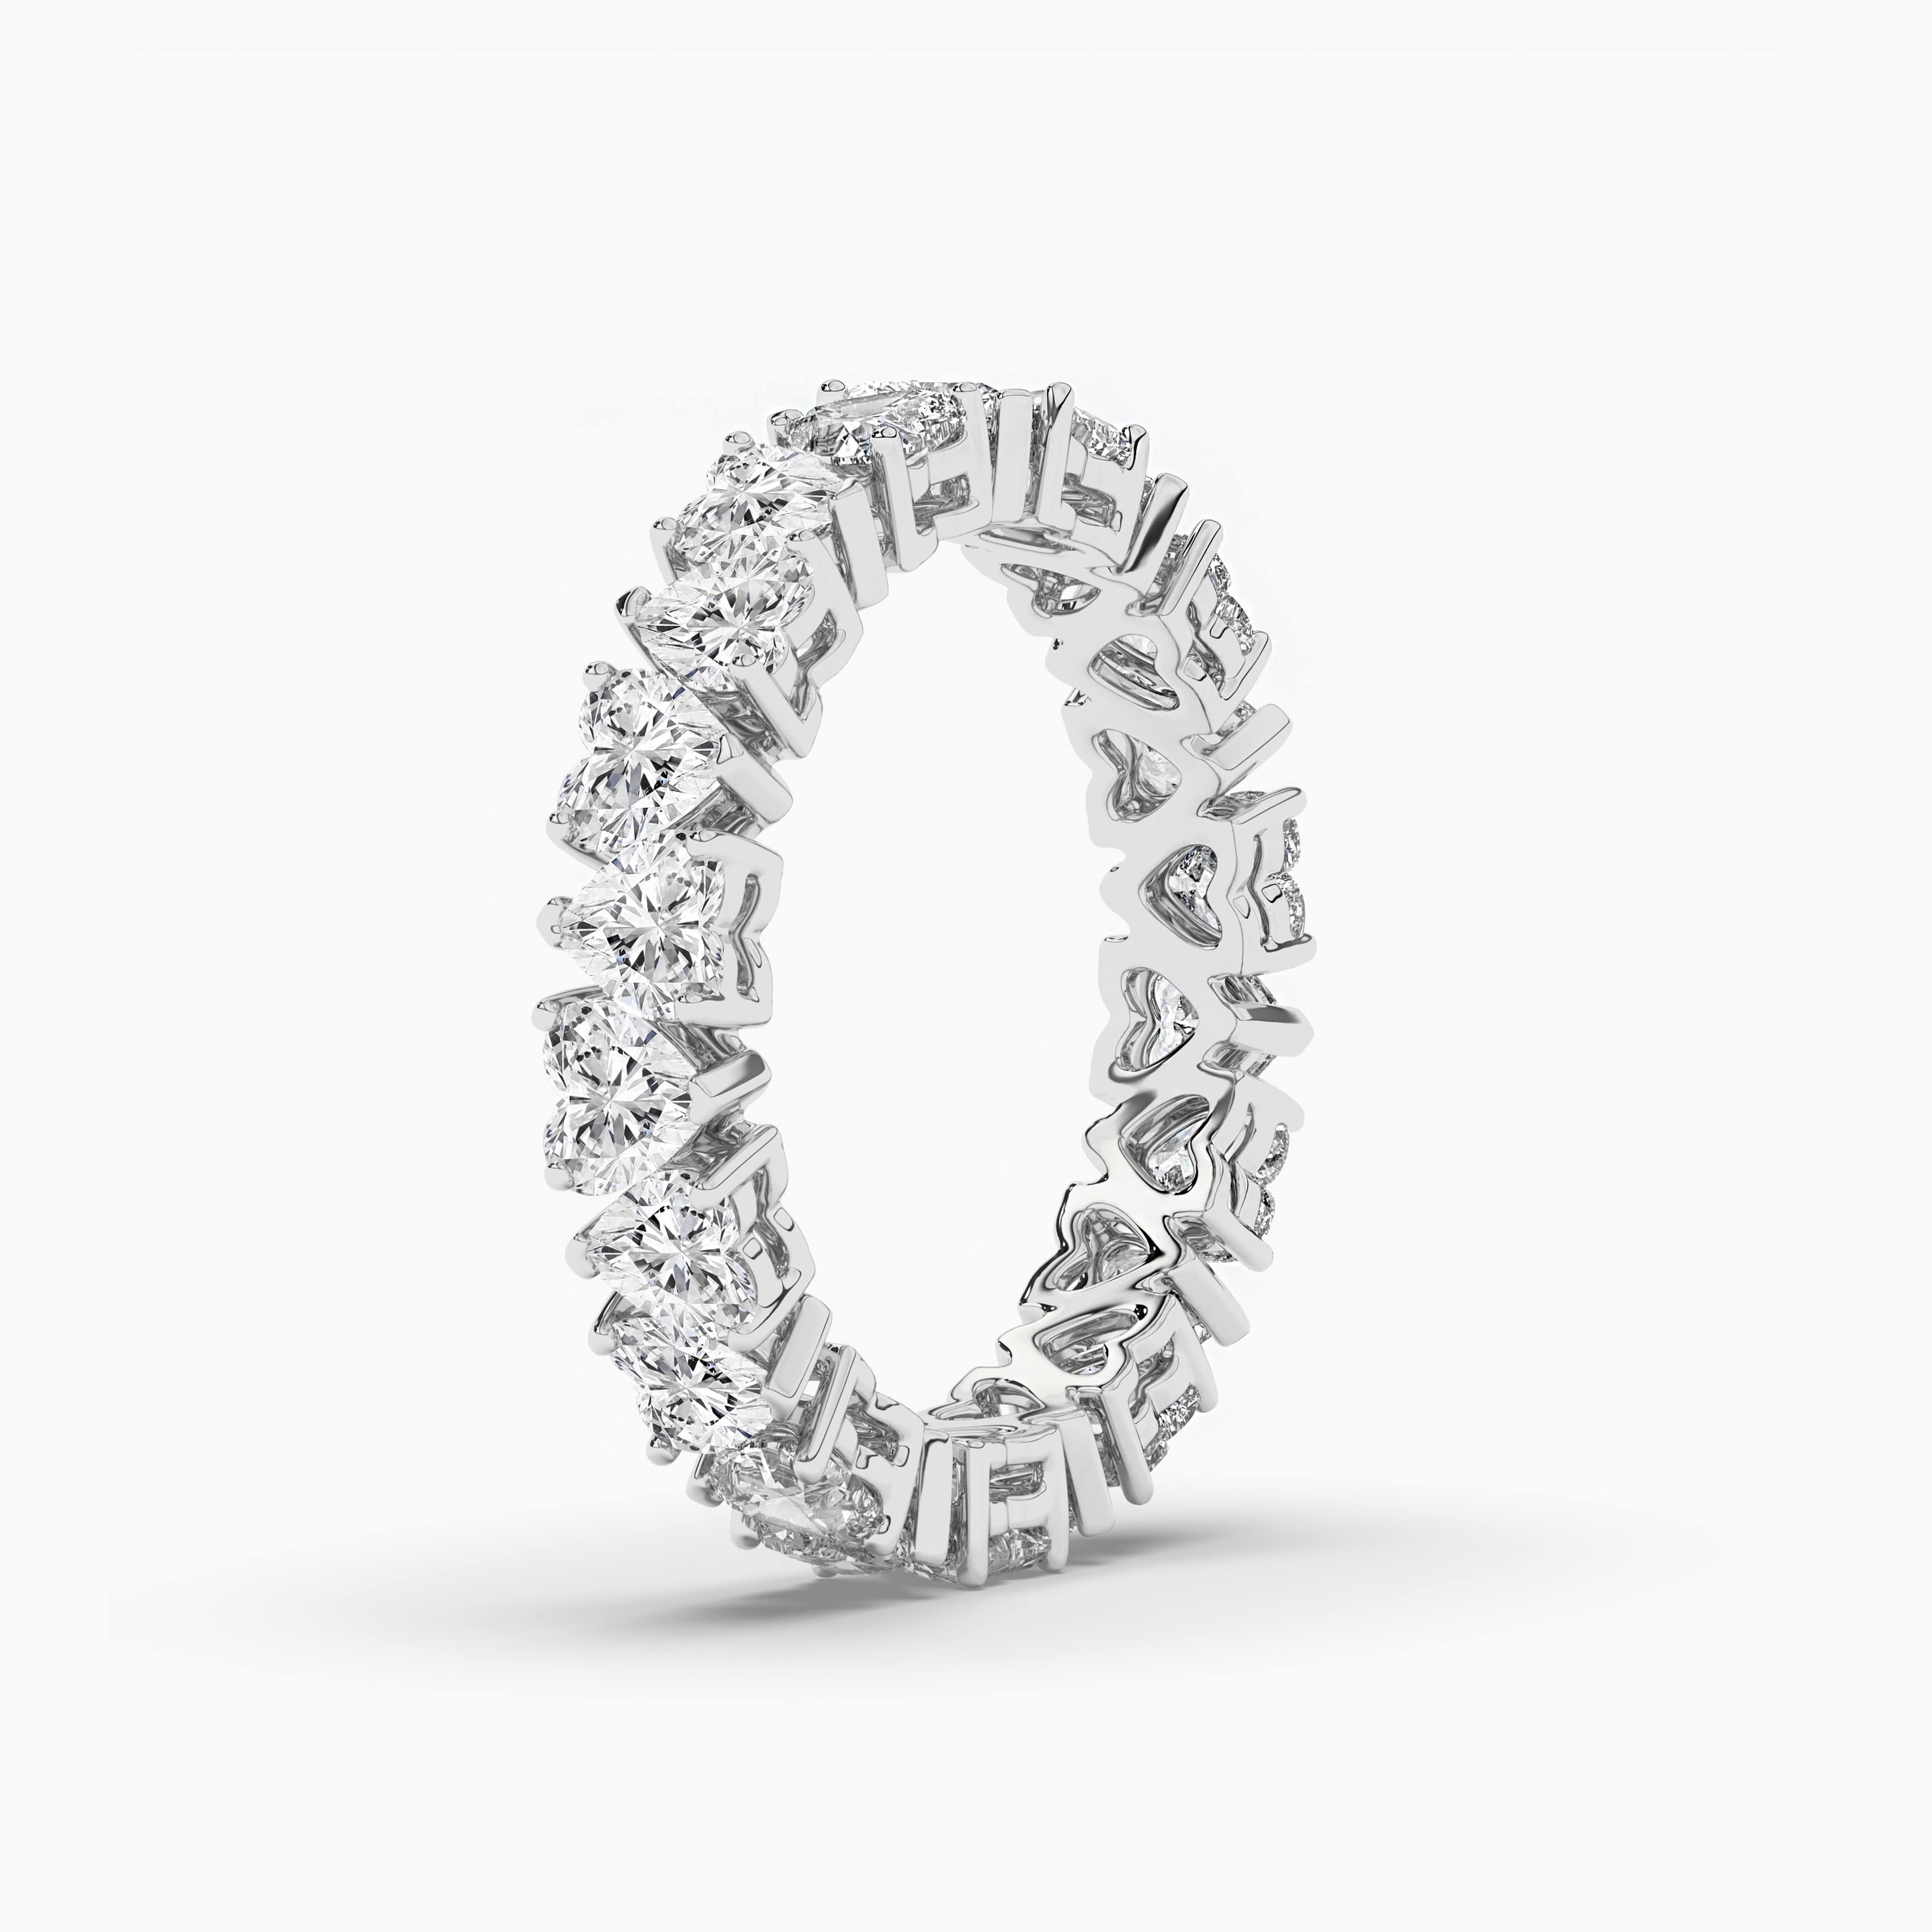 Eternity Ring with Heart Shaped Diamonds in White Gold